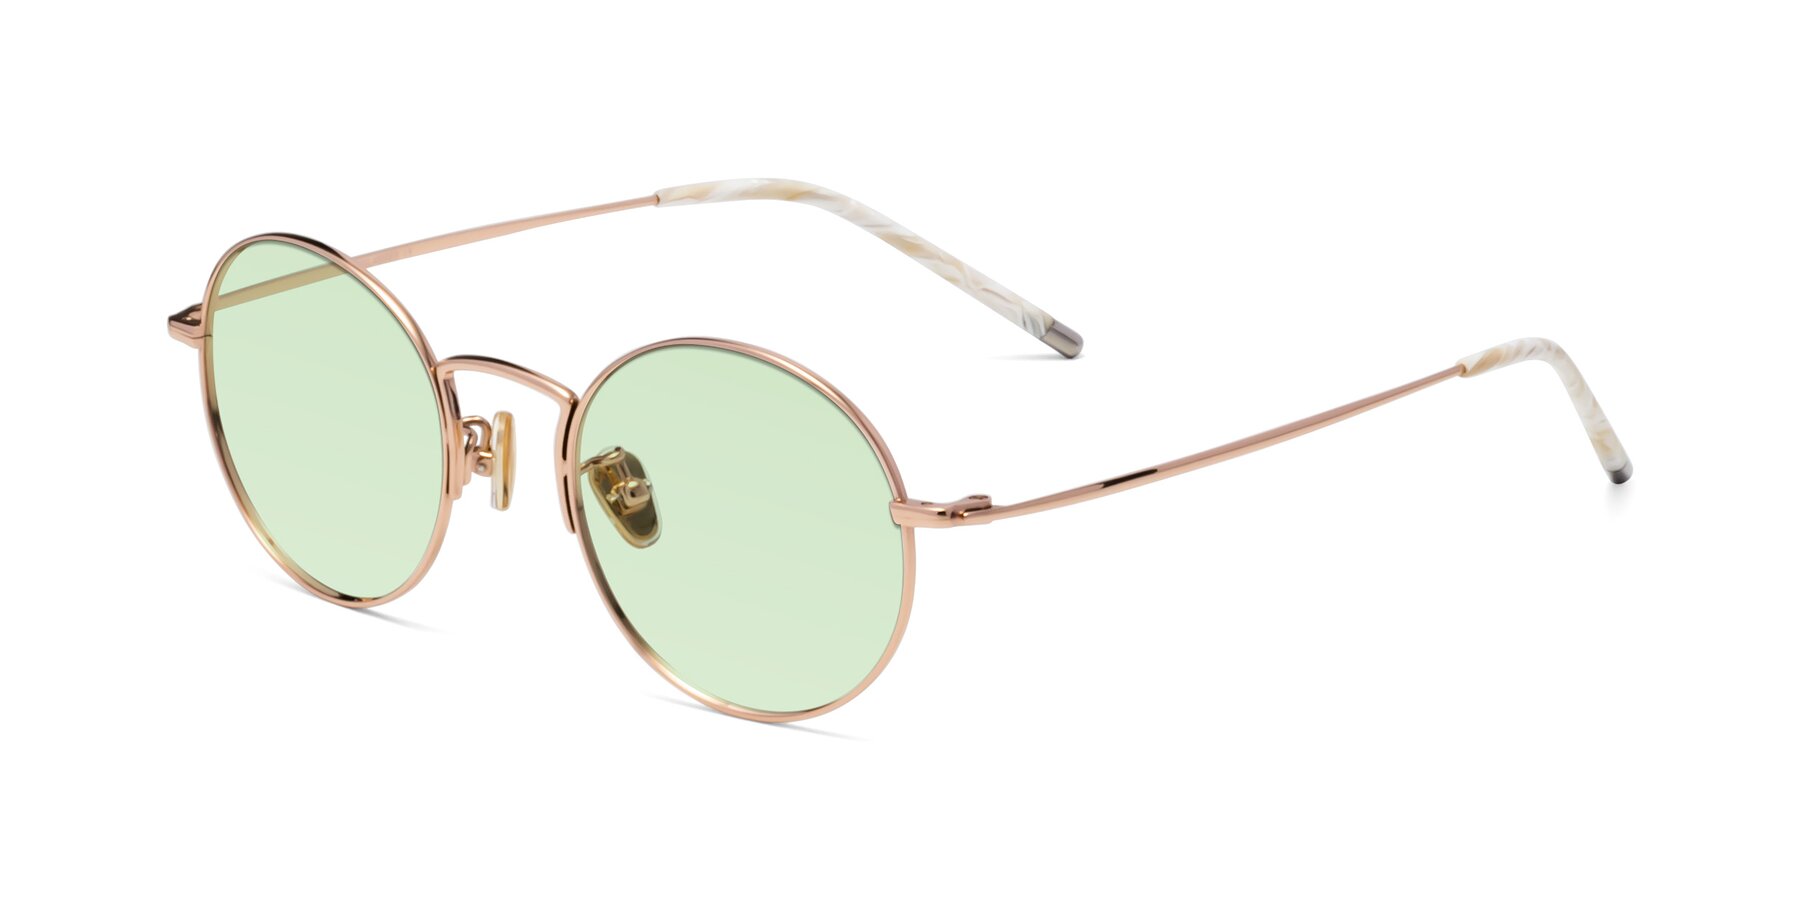 Angle of 80033 in Rose Gold with Light Green Tinted Lenses